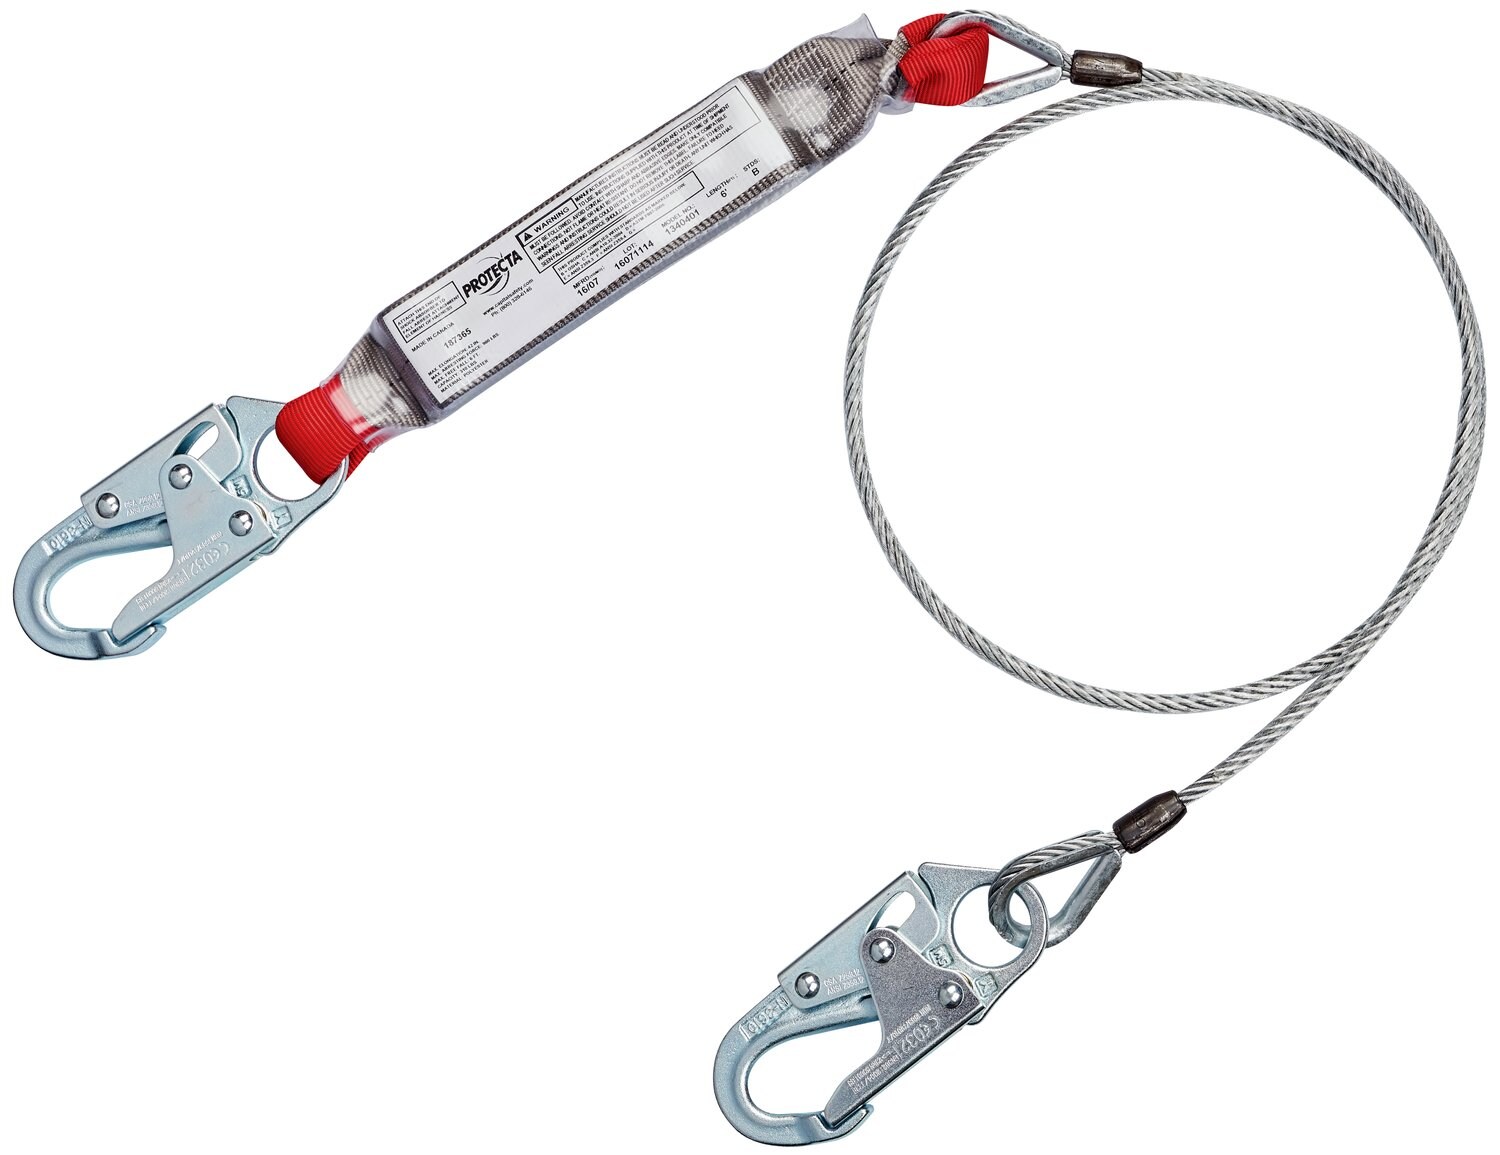 7012817369 - 3M Protecta Cable Shock-Absorbing Lanyard 1340401, 6 ft